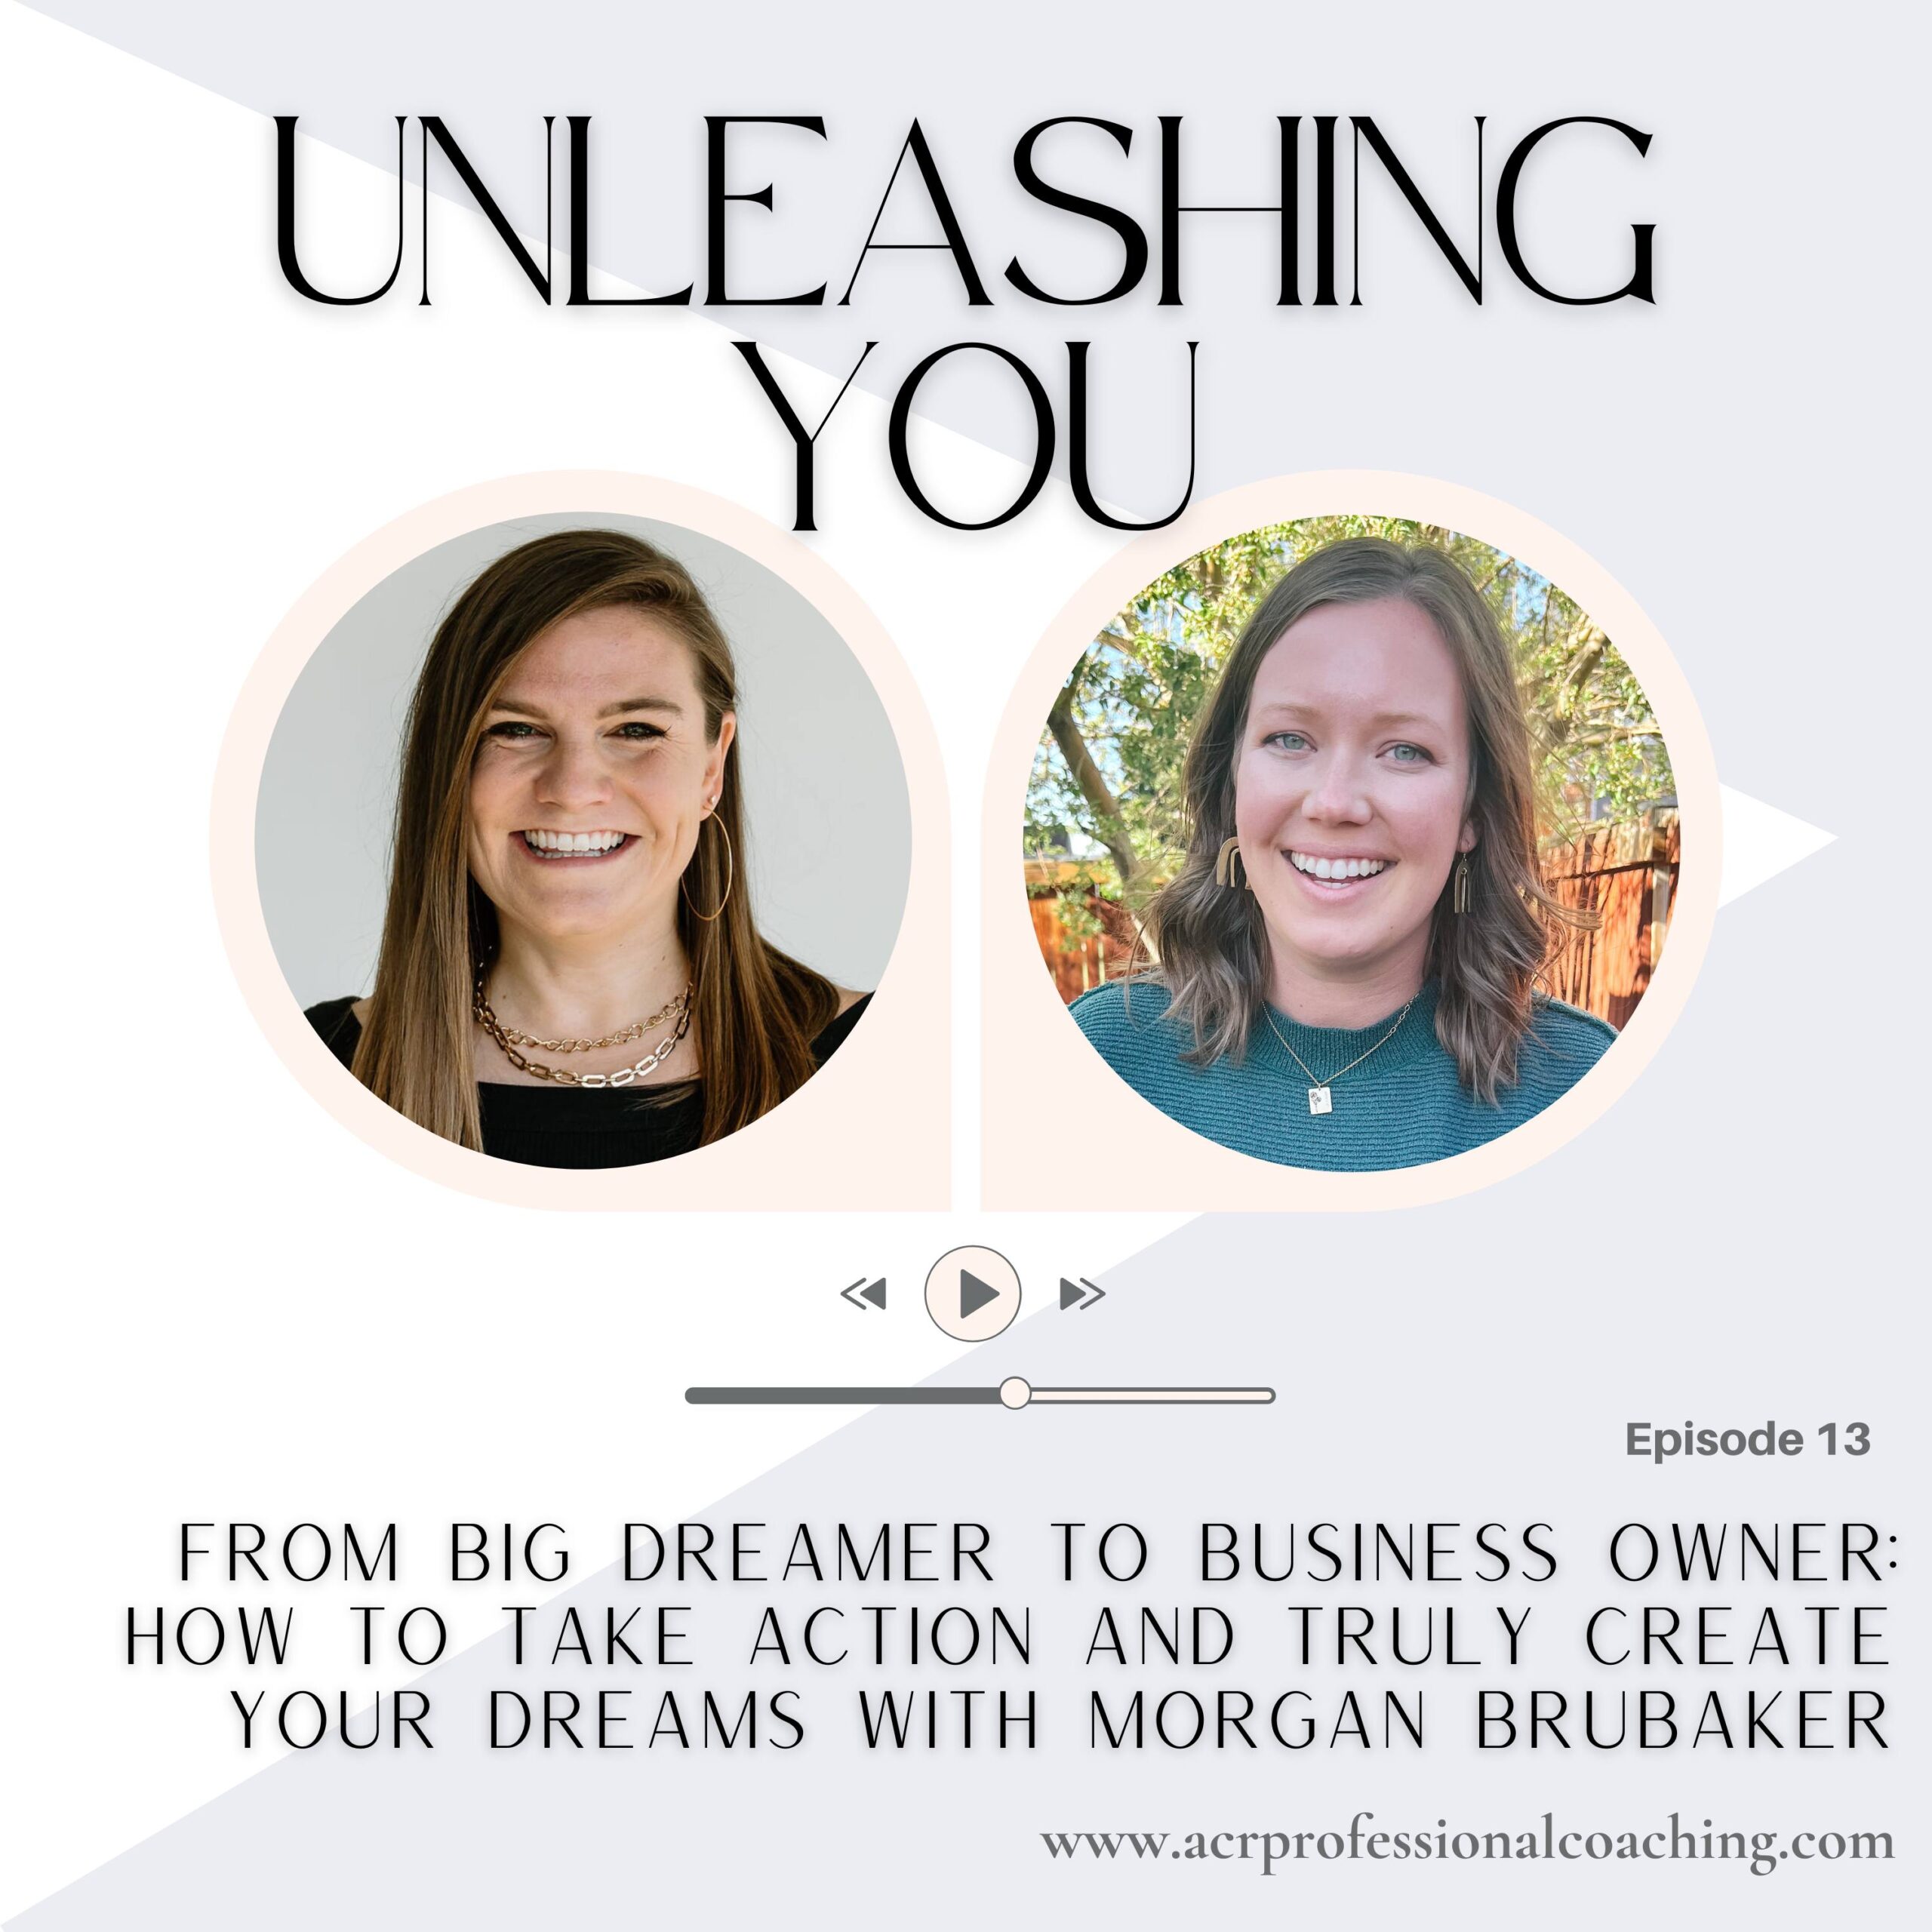 From Big Dreamer To Business Owner: How To Take Action and Truly Create Your Dreams with Morgan Brubaker